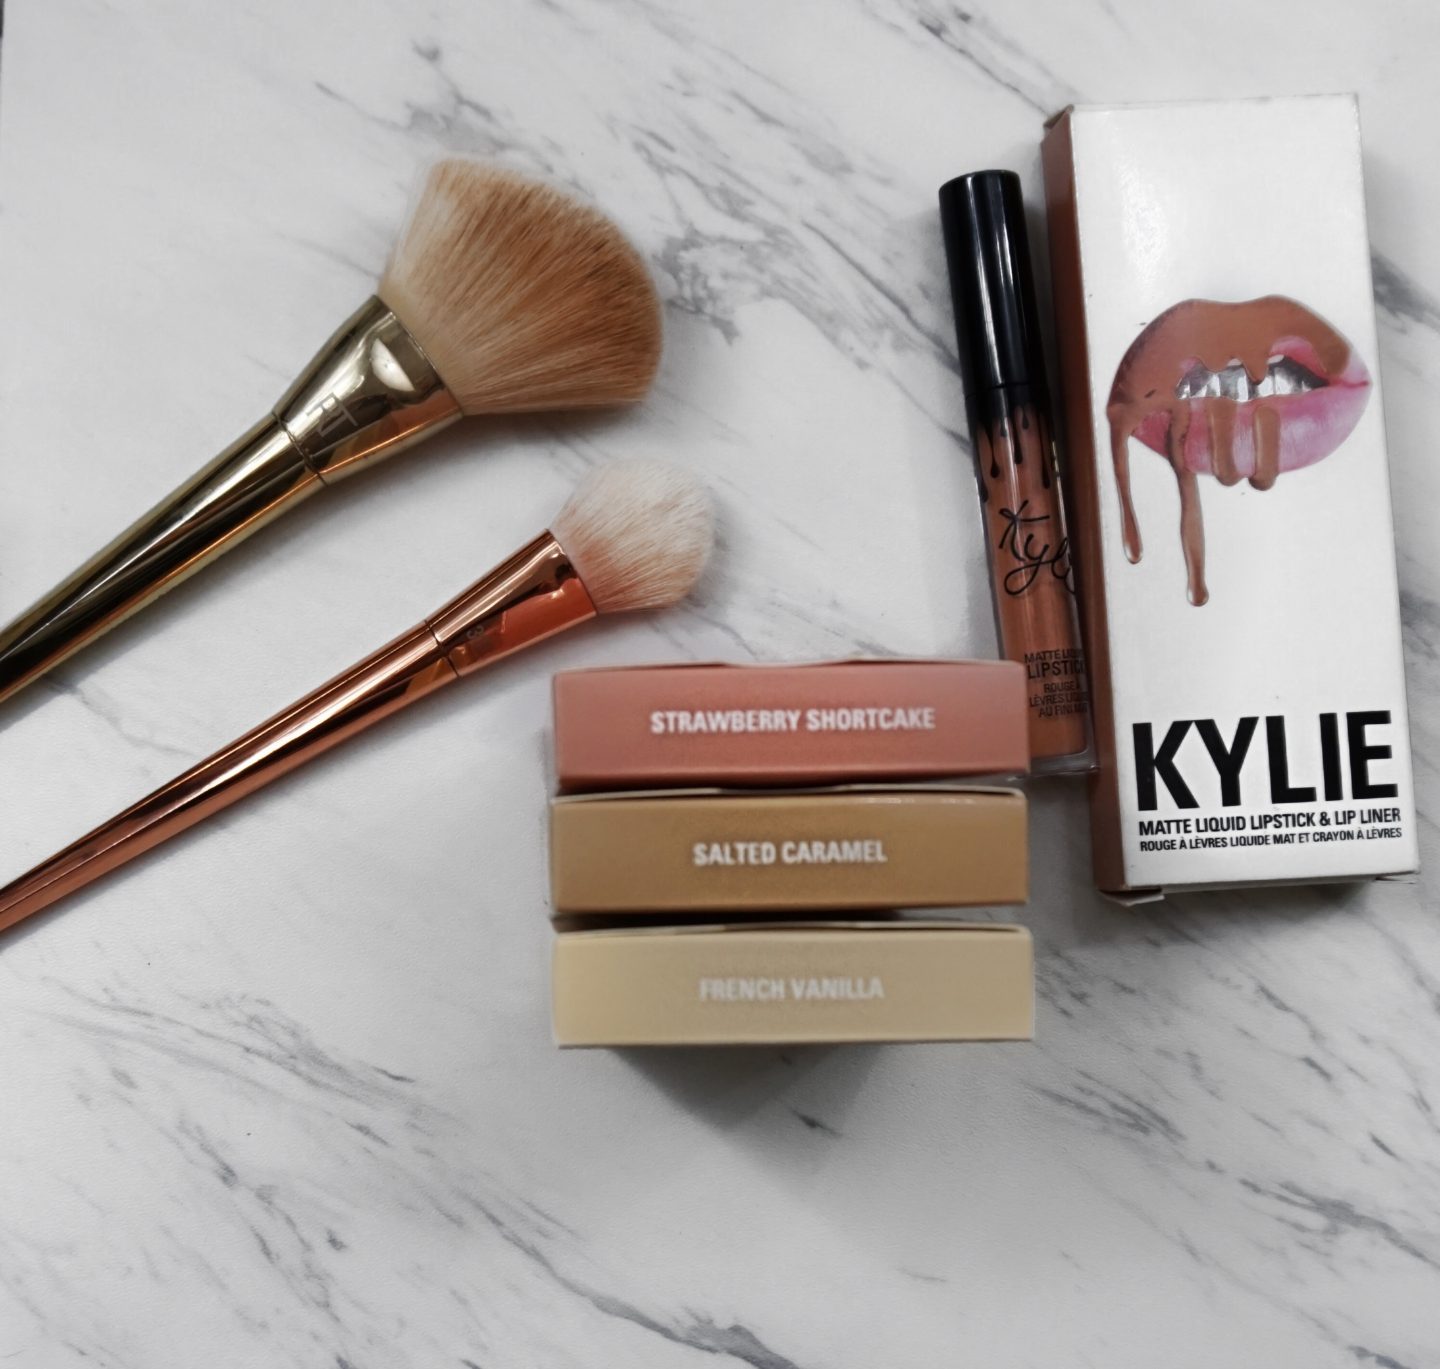 Kylie Kylighter Review & Giveaway